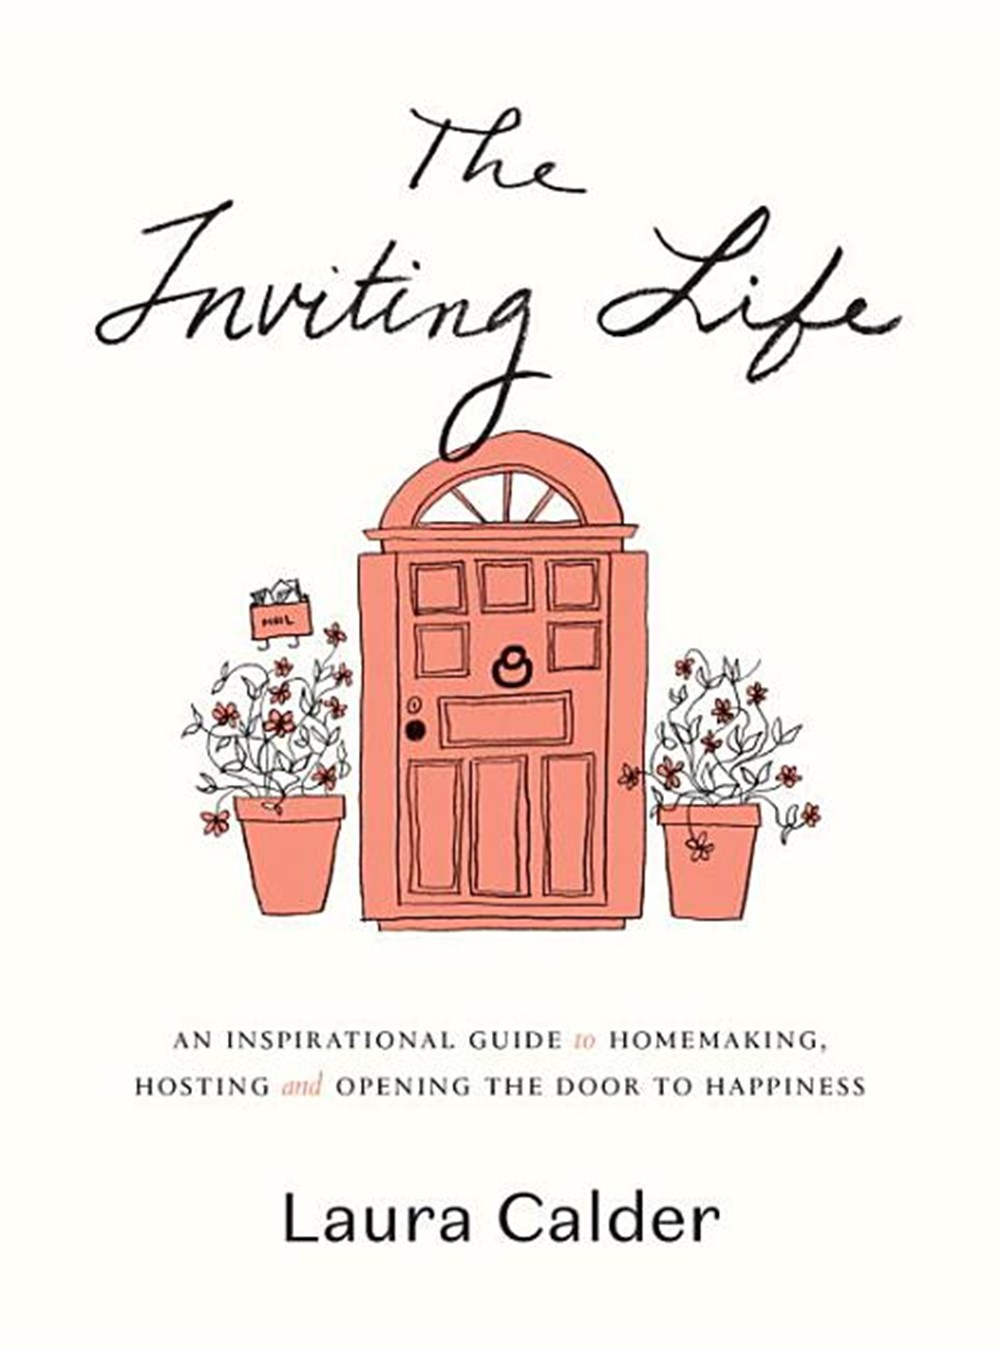 Inviting Life: An Inspirational Guide to Homemaking, Hosting and Opening the Door to Happiness